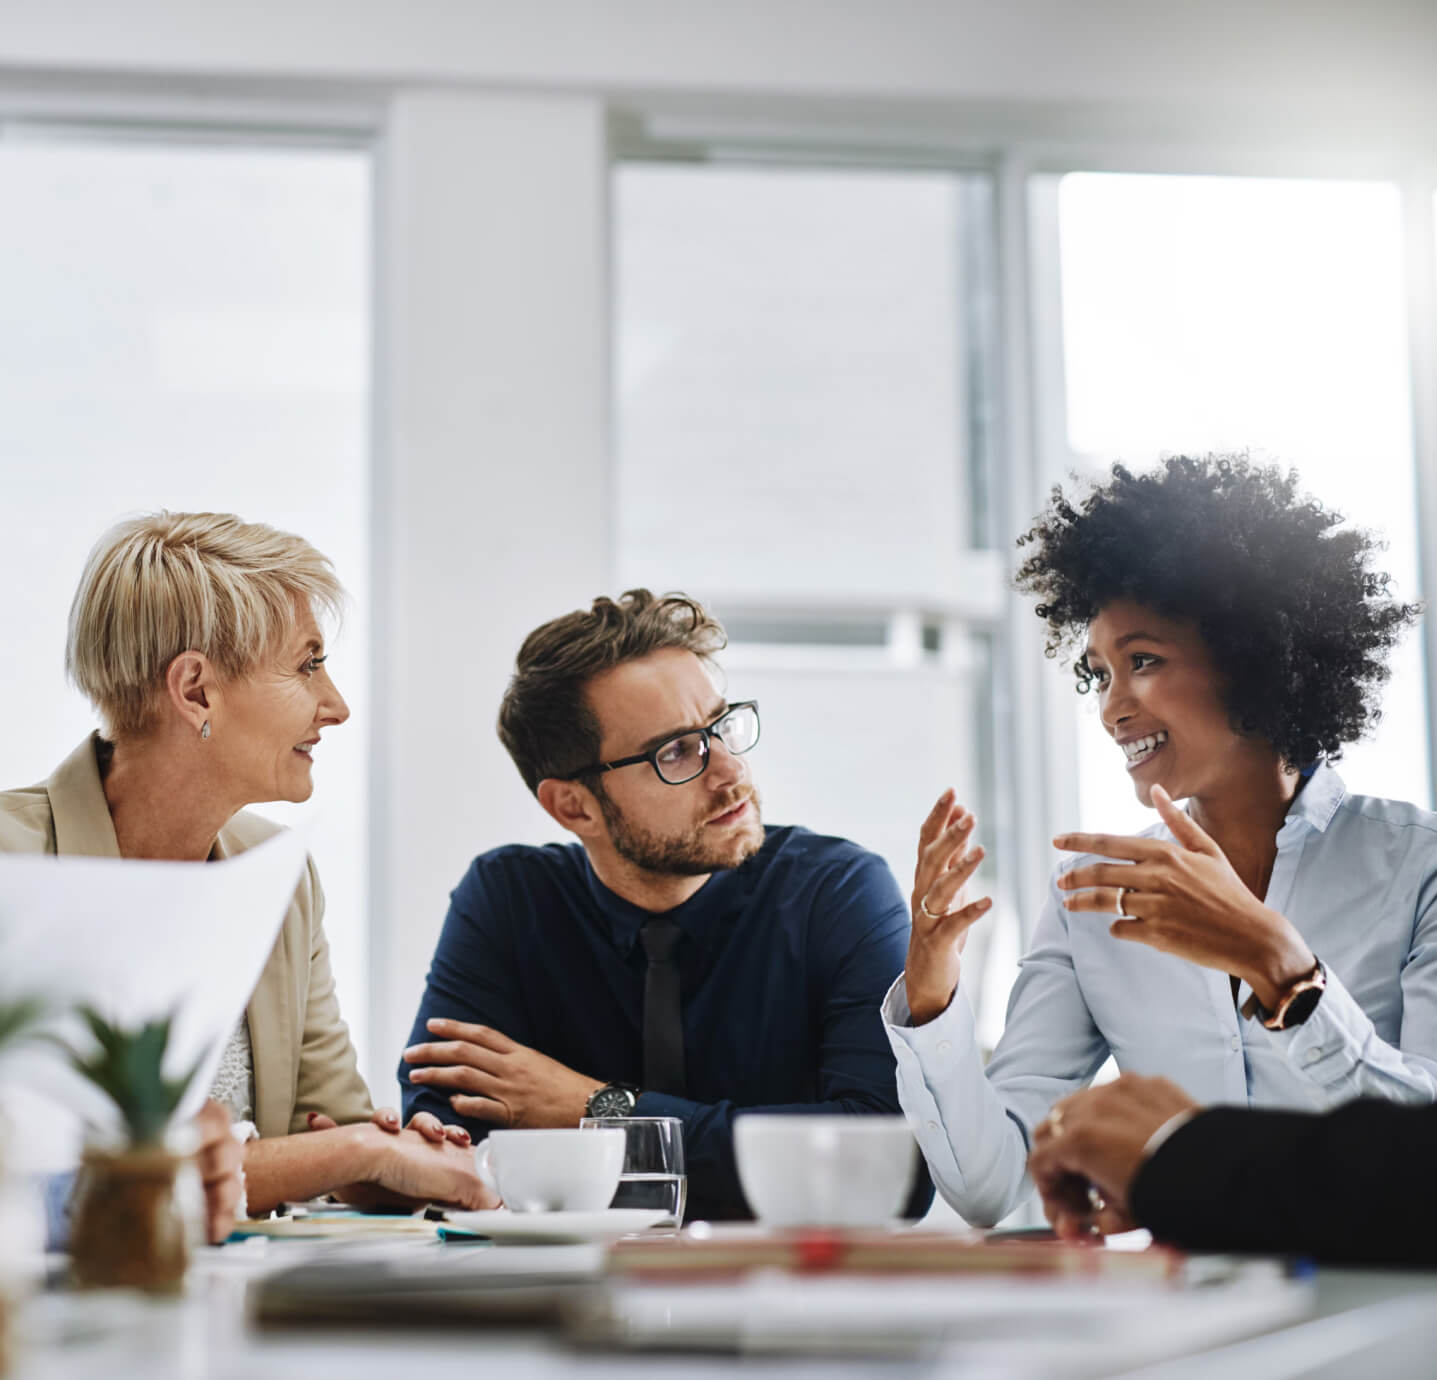 Creating the right company culture starts with the right leaders